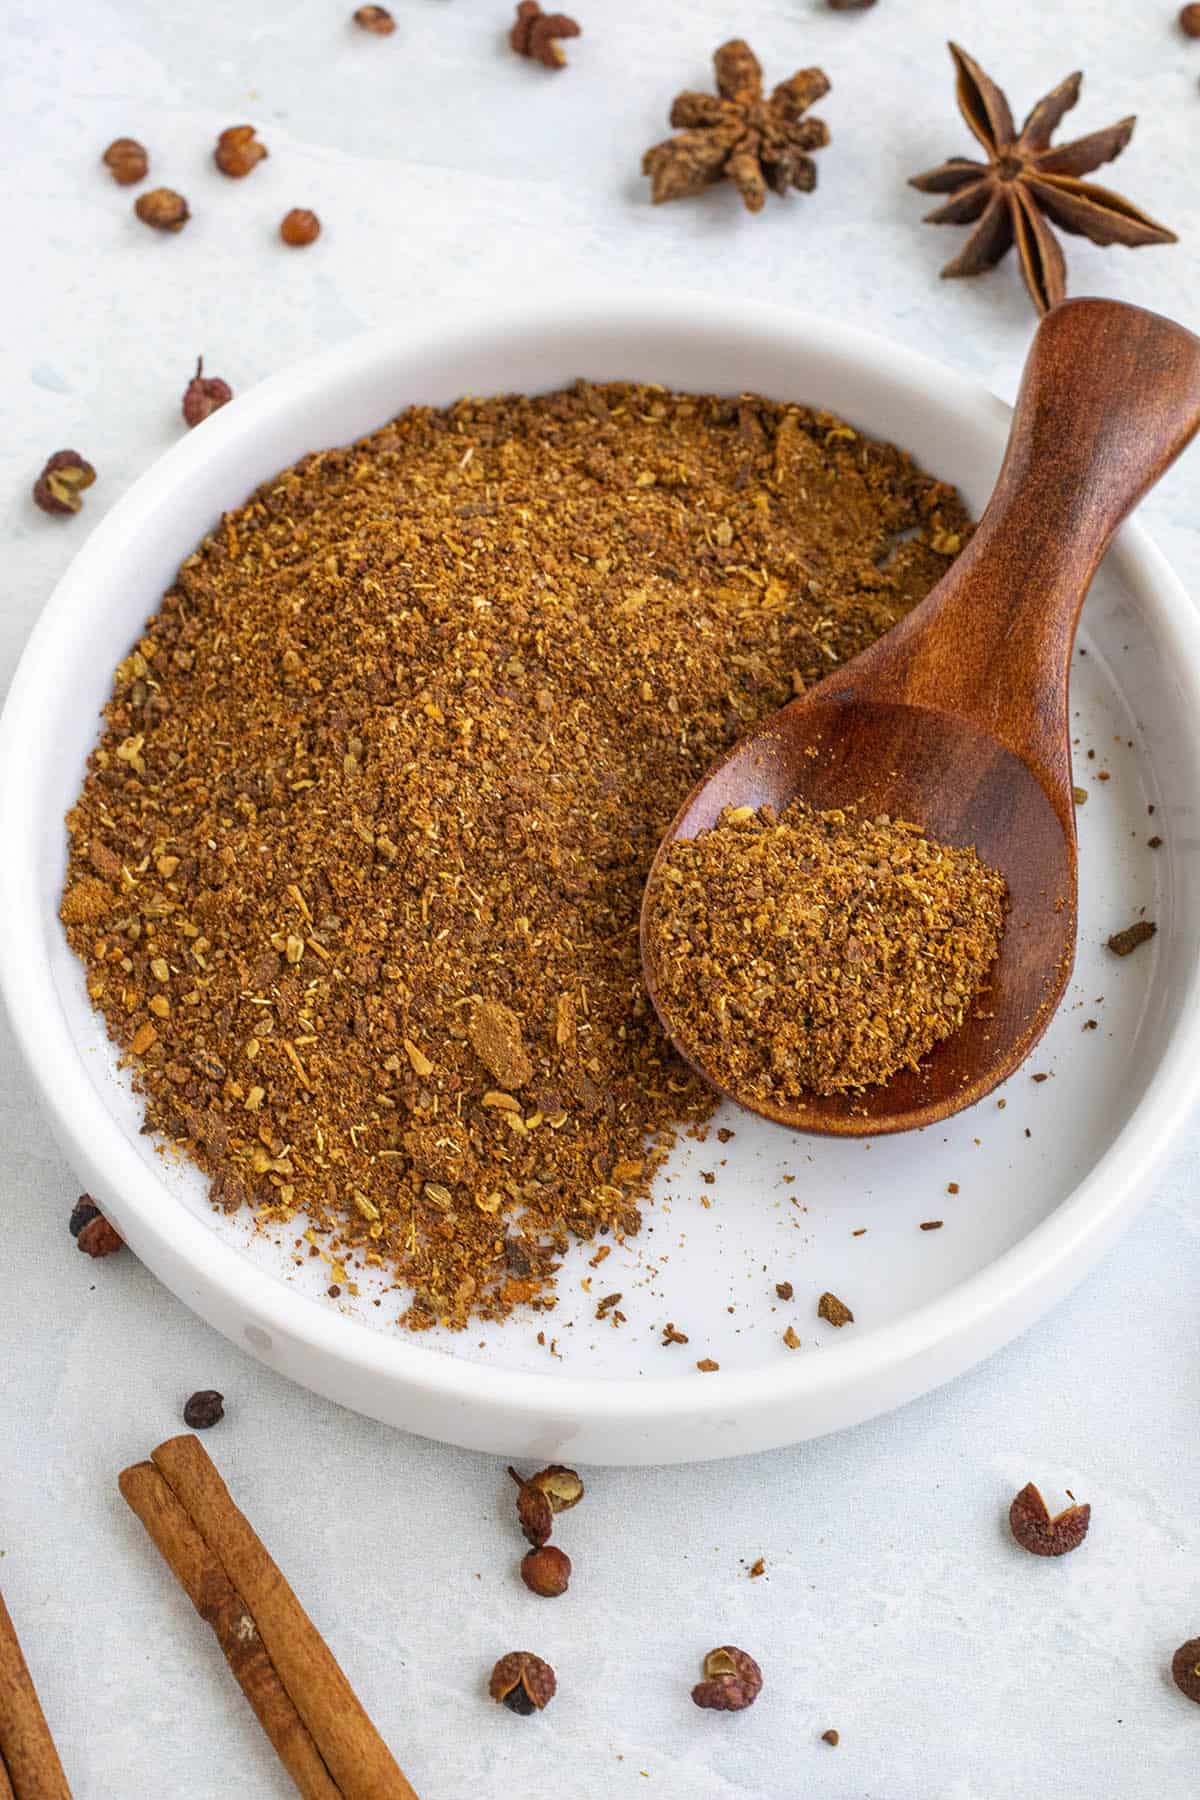 Chinese Five-Spice Powder